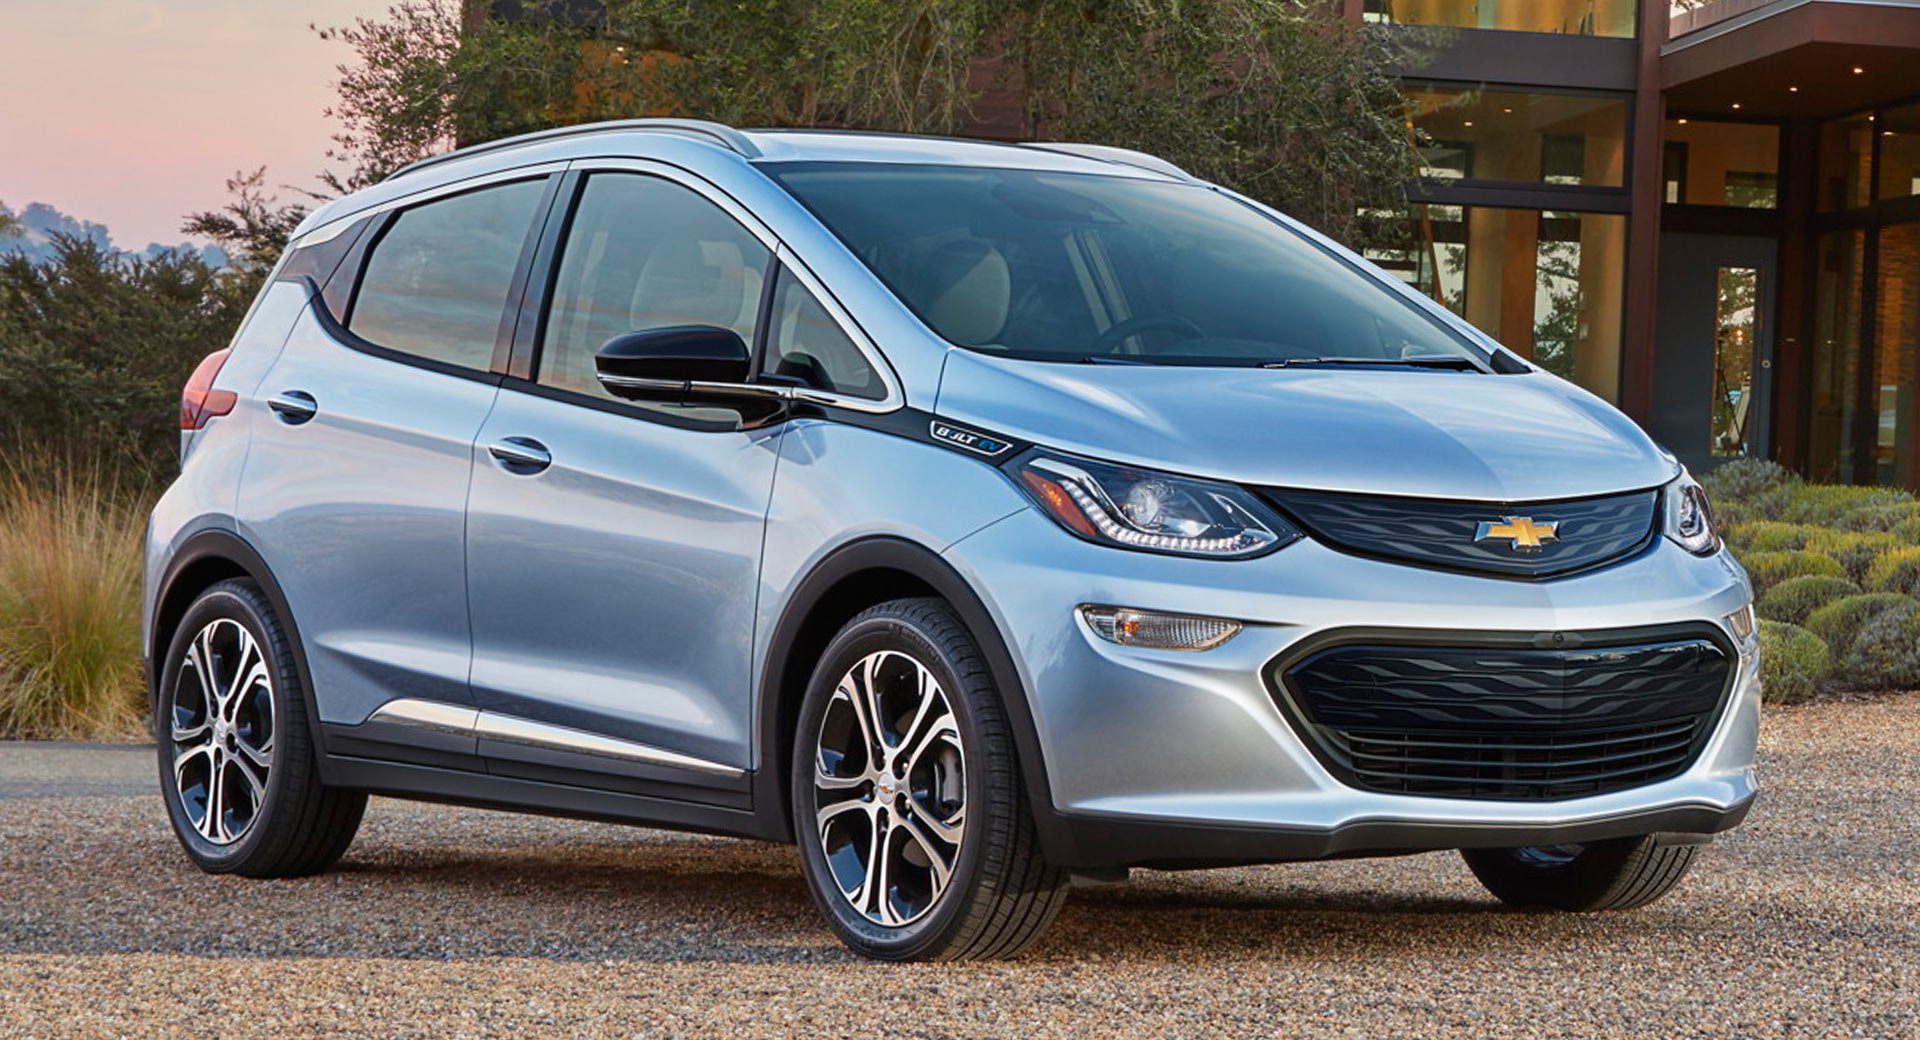 2020 Chevrolet Bolt To Have Increased Range Of 259 Miles